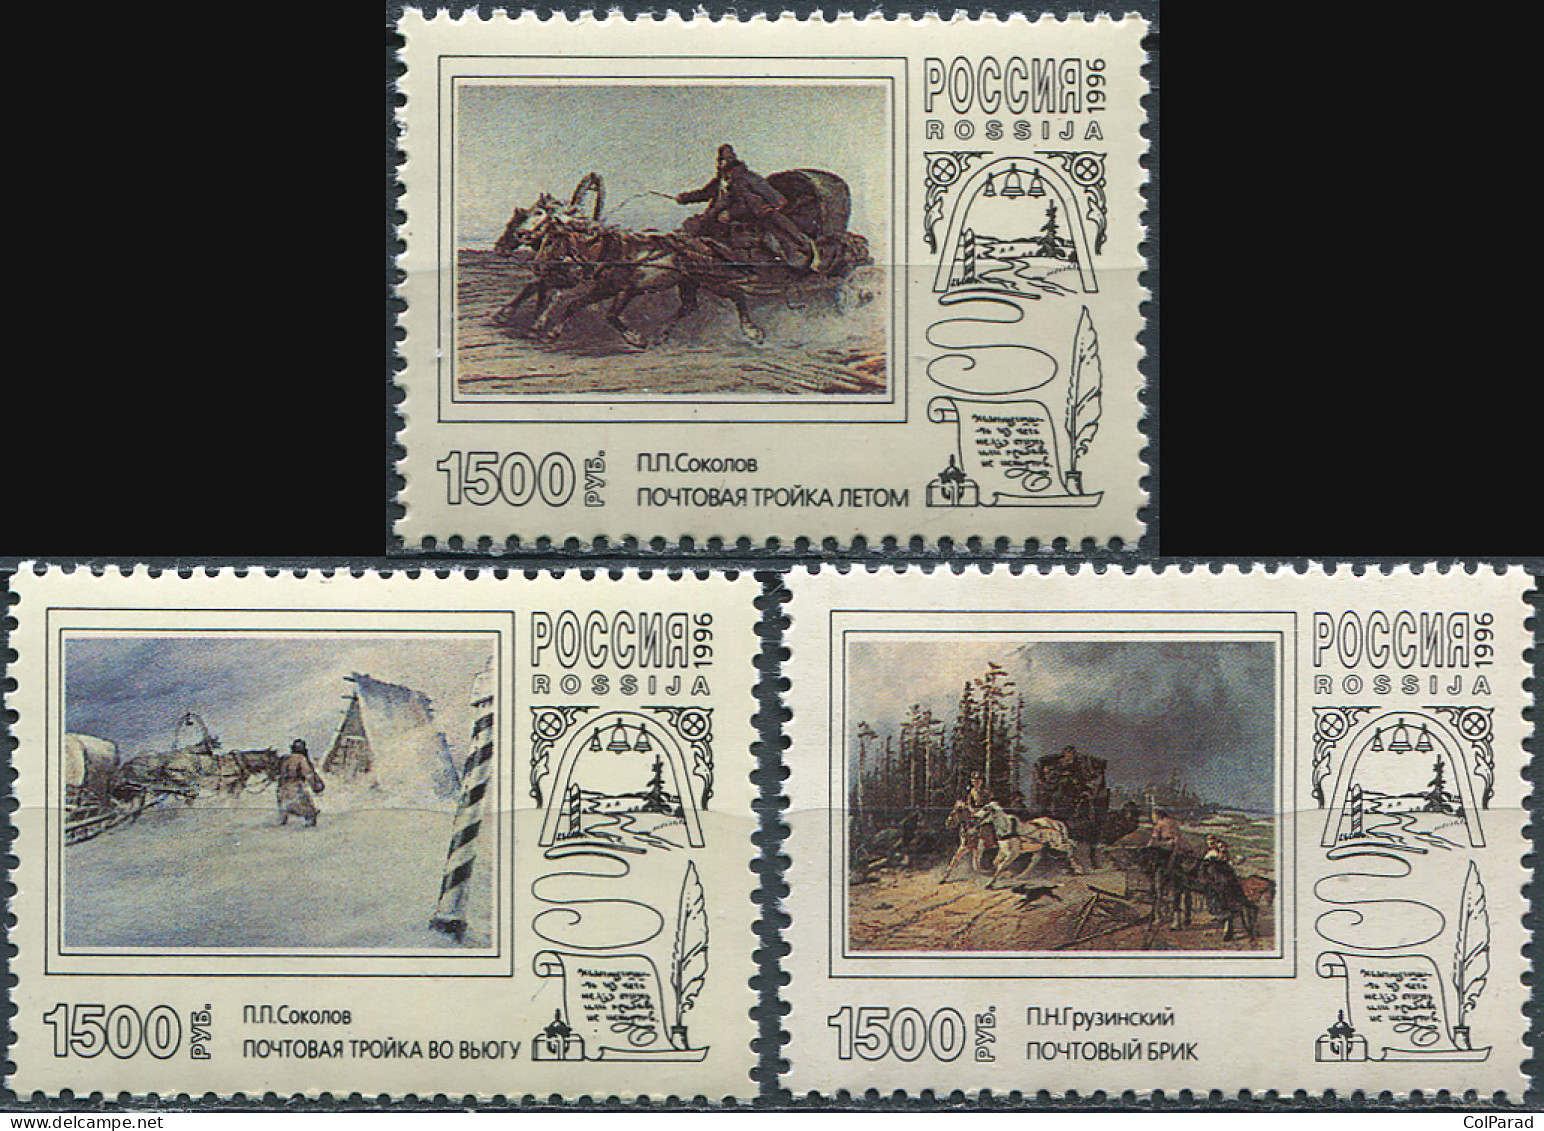 RUSSIA - 1996 - SET OF 3 STAMPS MNH ** - Postal Troikas In Paintings - Nuevos